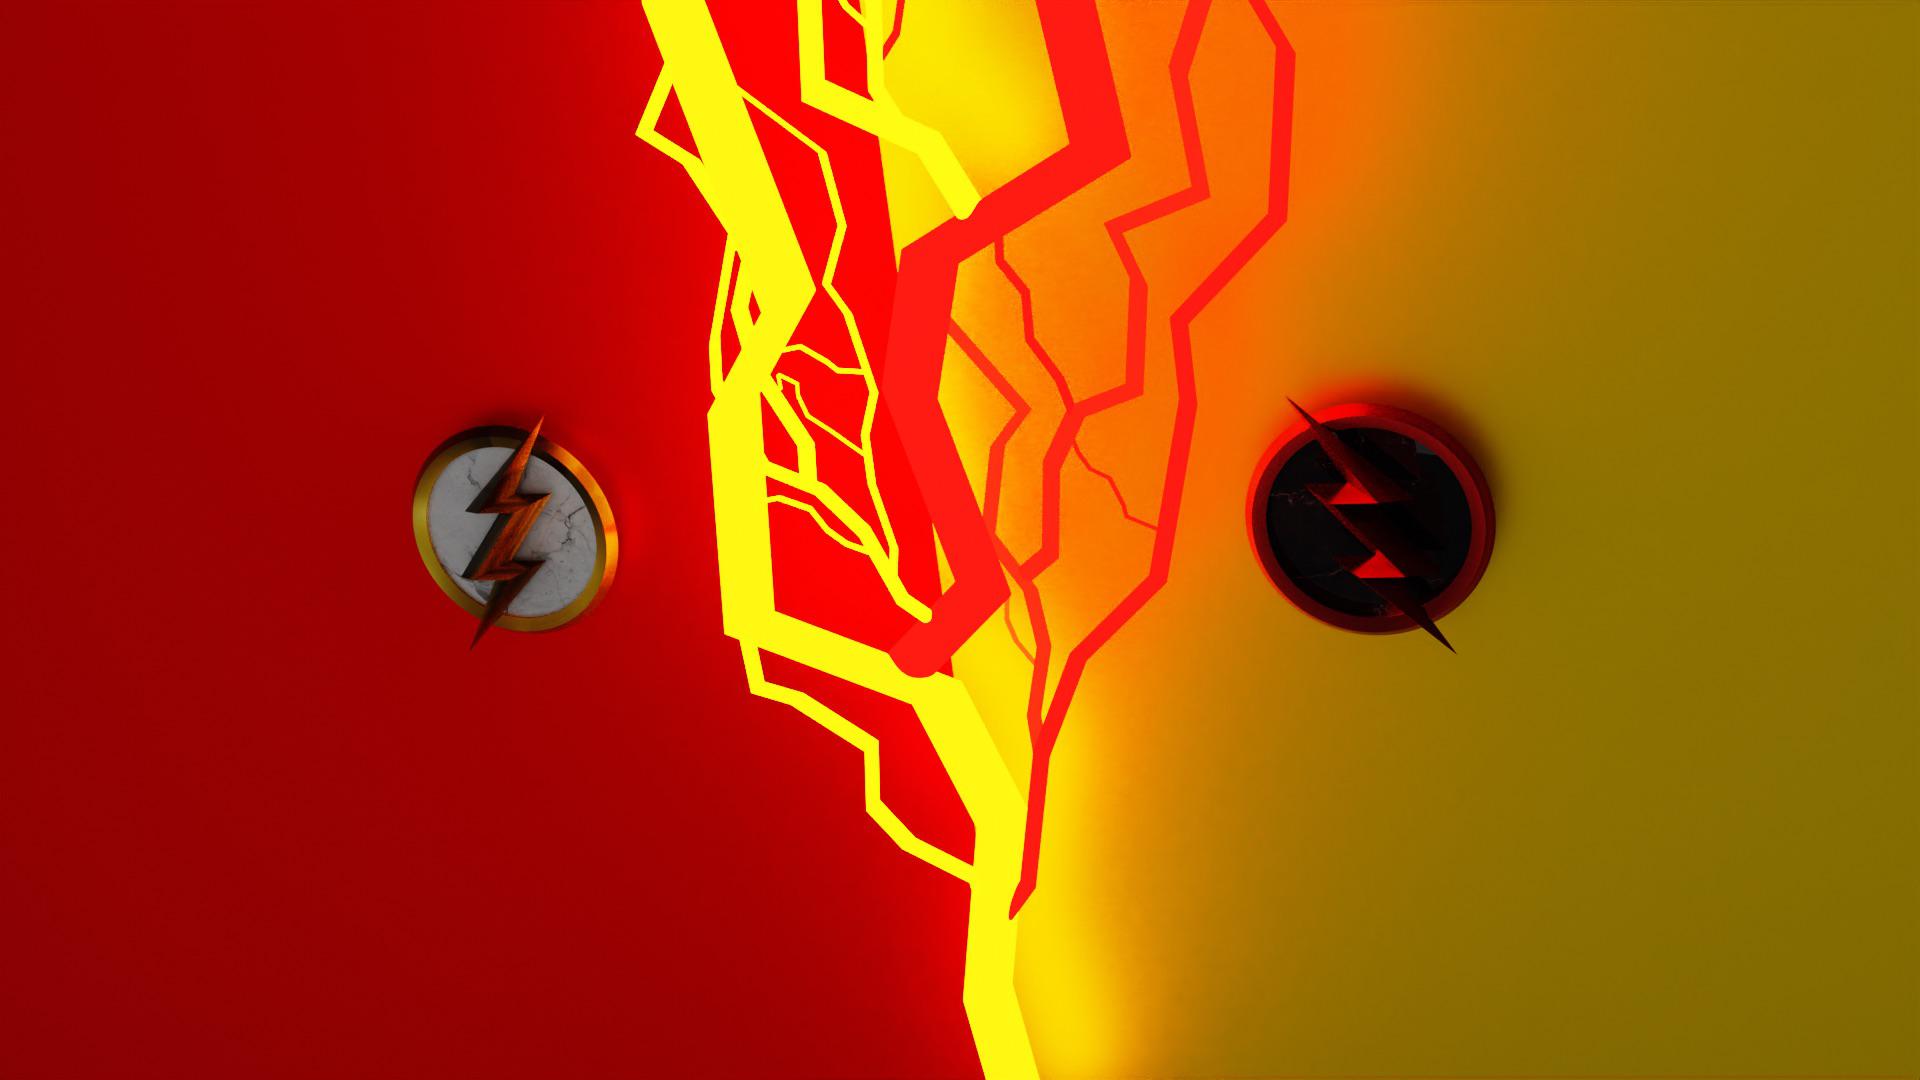 Flash And Reverse Flash Wallpaper I Made In Blender! Hope You Like It!